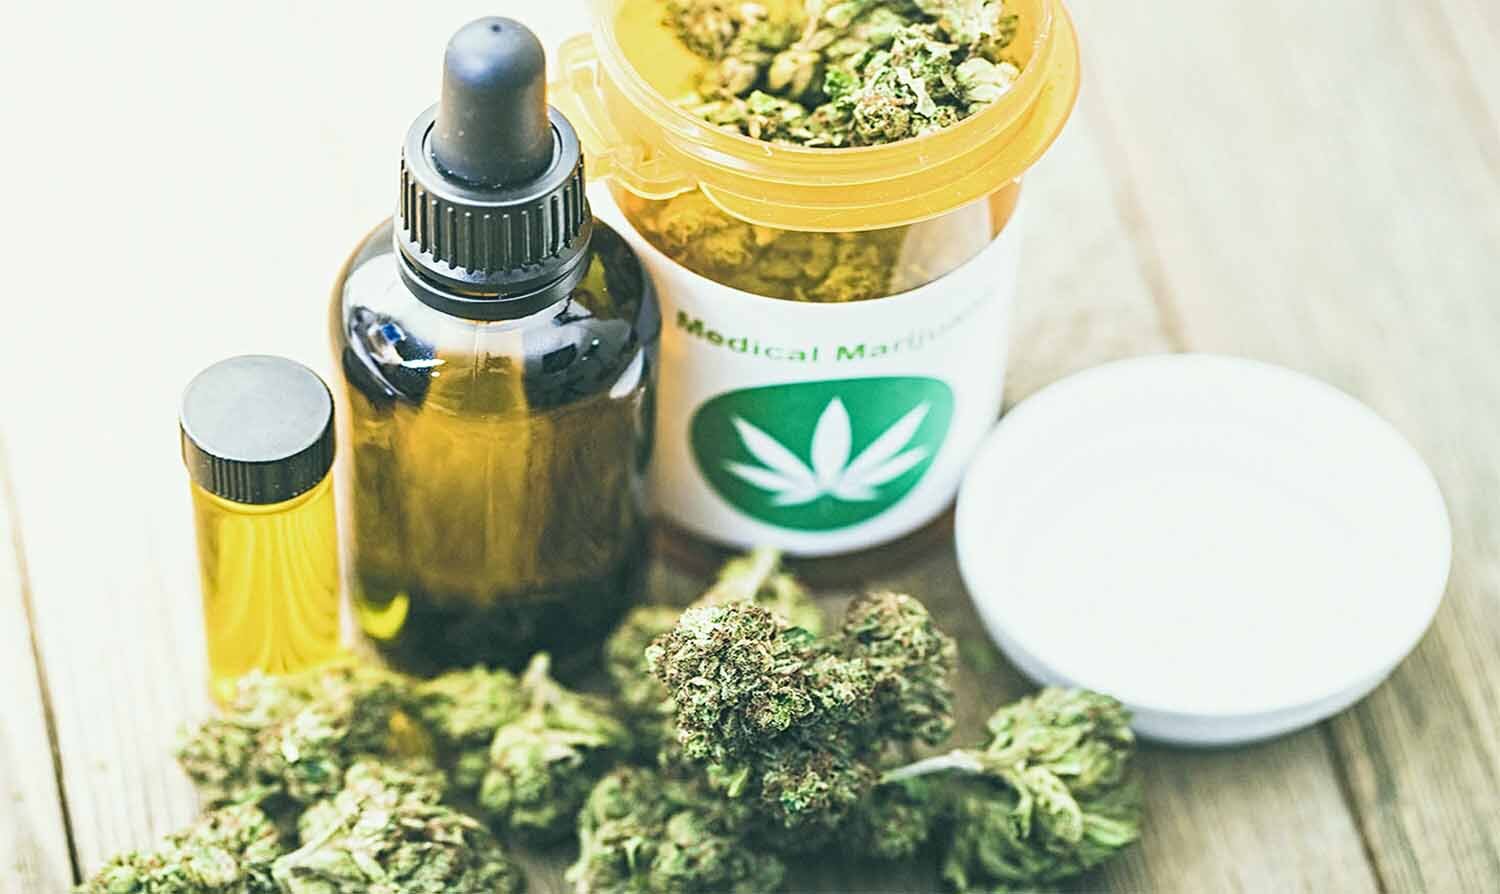 Photo showing types of marijuana, weed, cannabis, and cbd oil that pharmacists and dentists use.